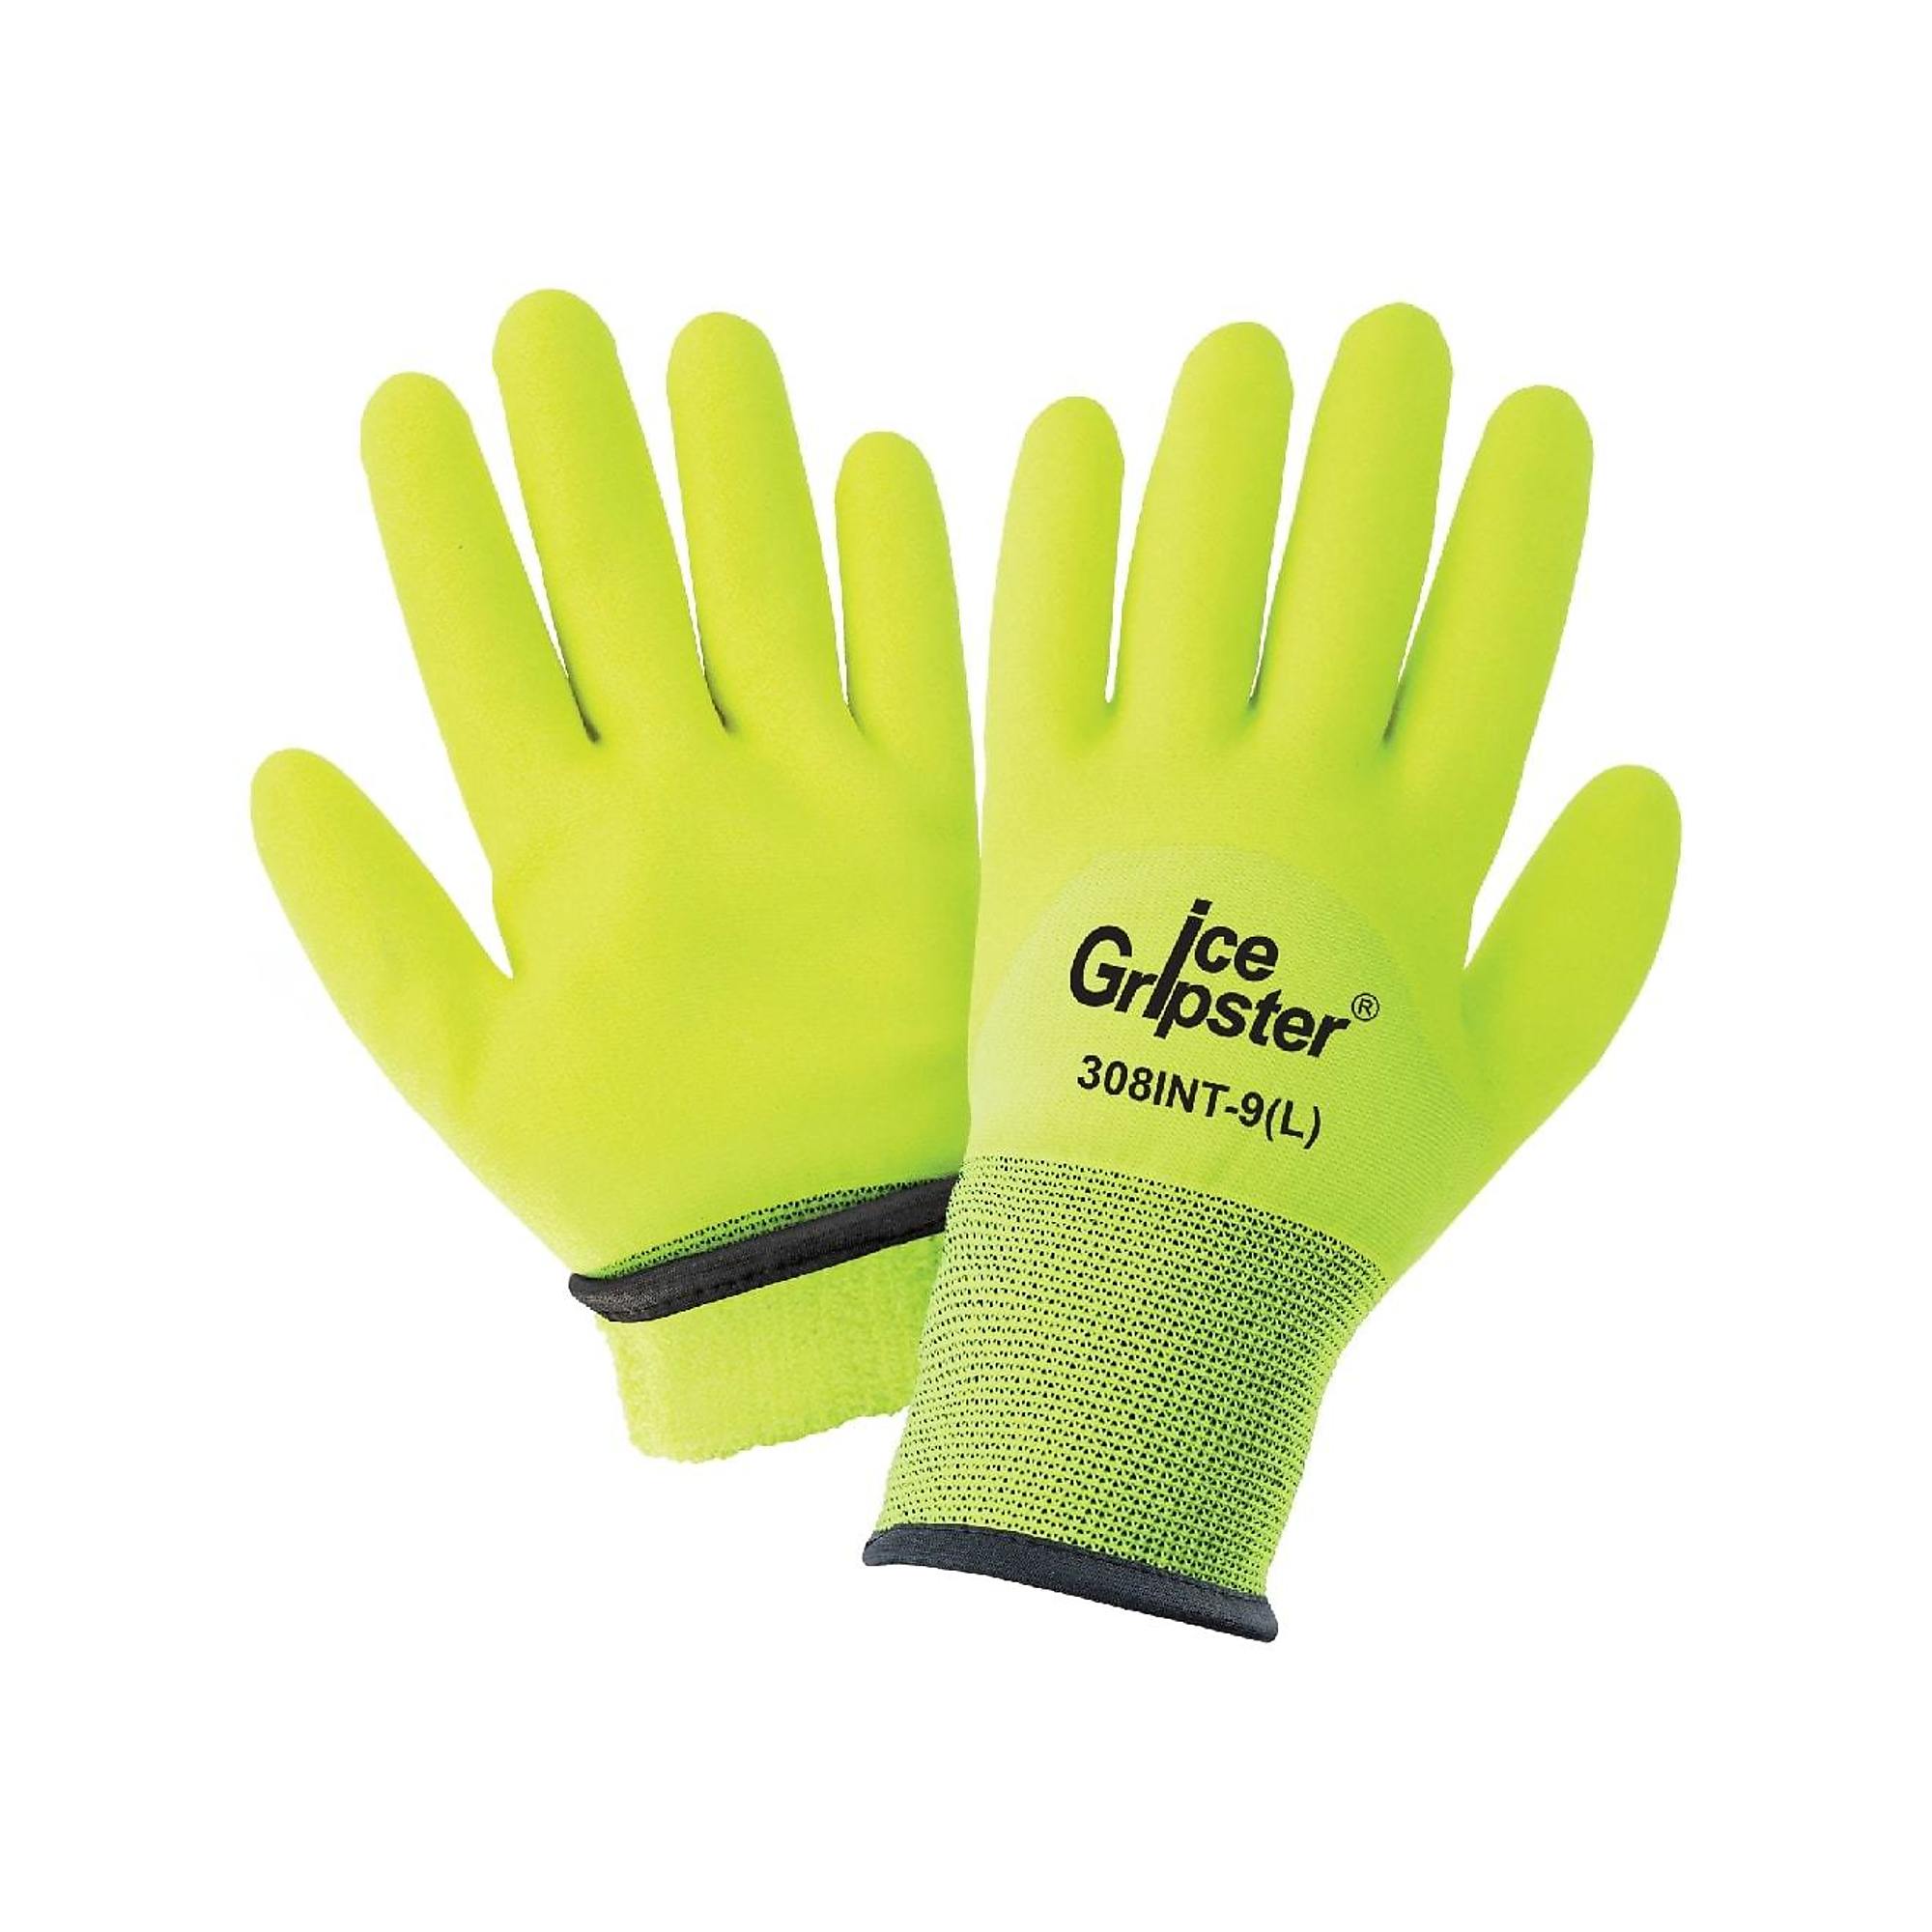 Global Glove Ice Gripster , HV Yel, Insulated, PVC Dip,Cut Resistant A2 Gloves- 12 Pairs, Size L, Color High Visibility Yellow/Green, Included (qty.)